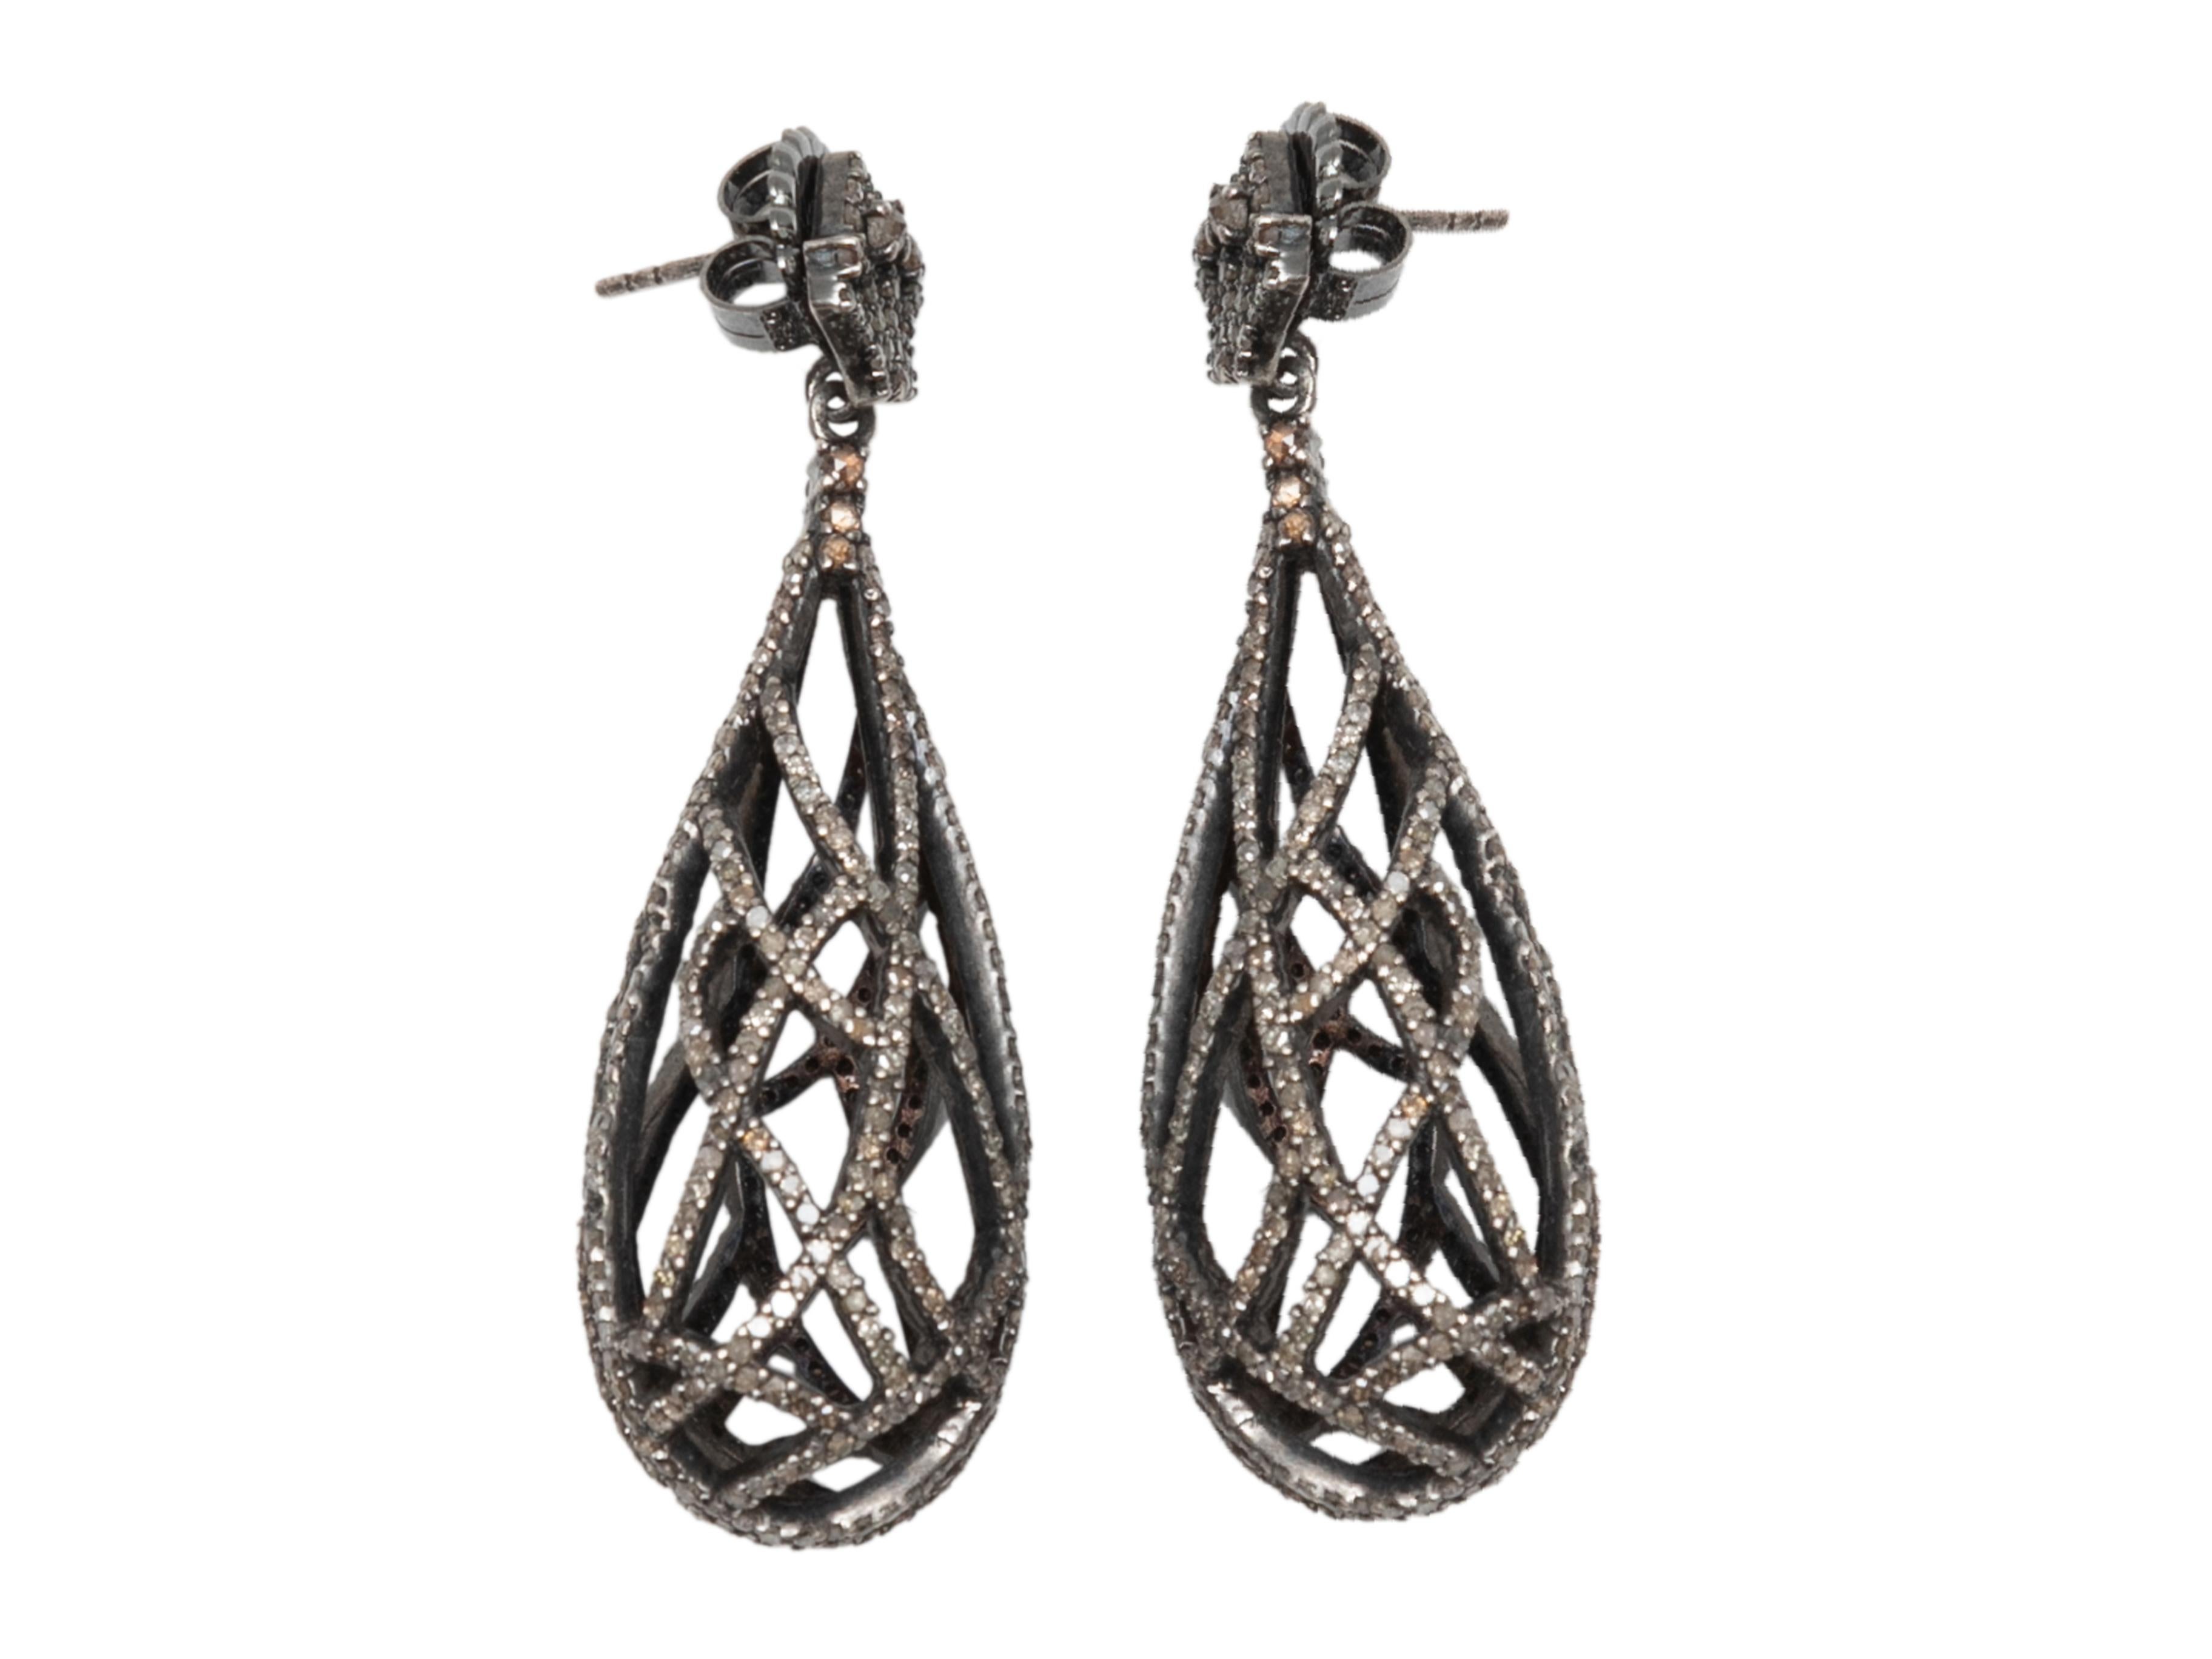 Silver-Tone & Pave Diamond Bavna Teardrop Pierced Earrings In Good Condition For Sale In New York, NY